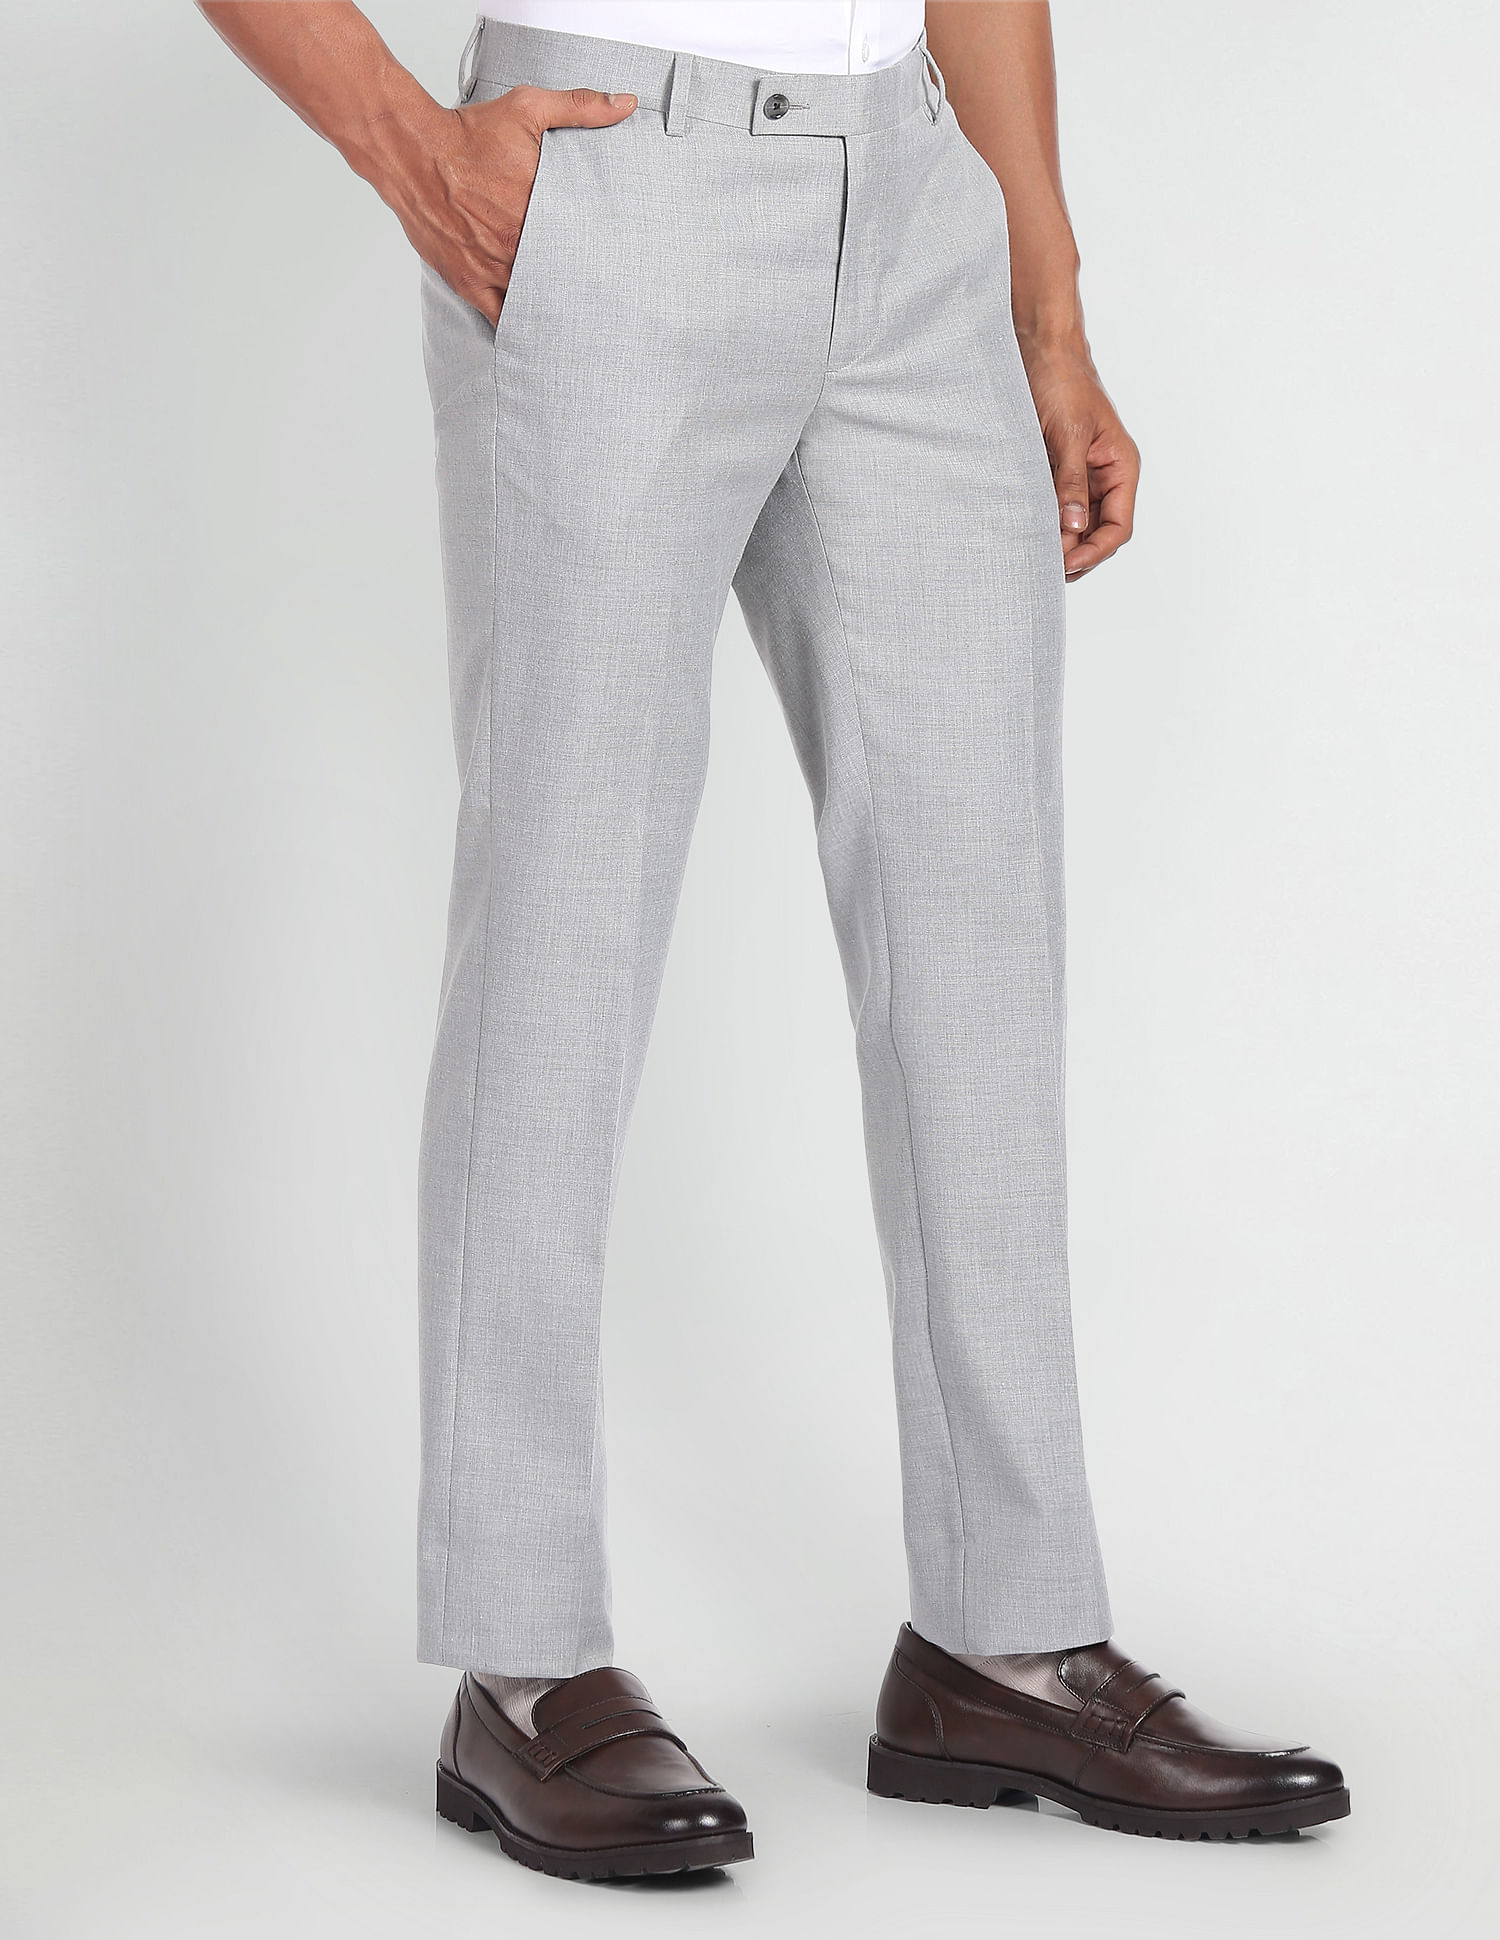 Buy Arrow Mid Rise Striped Formal Trousers - NNNOW.com